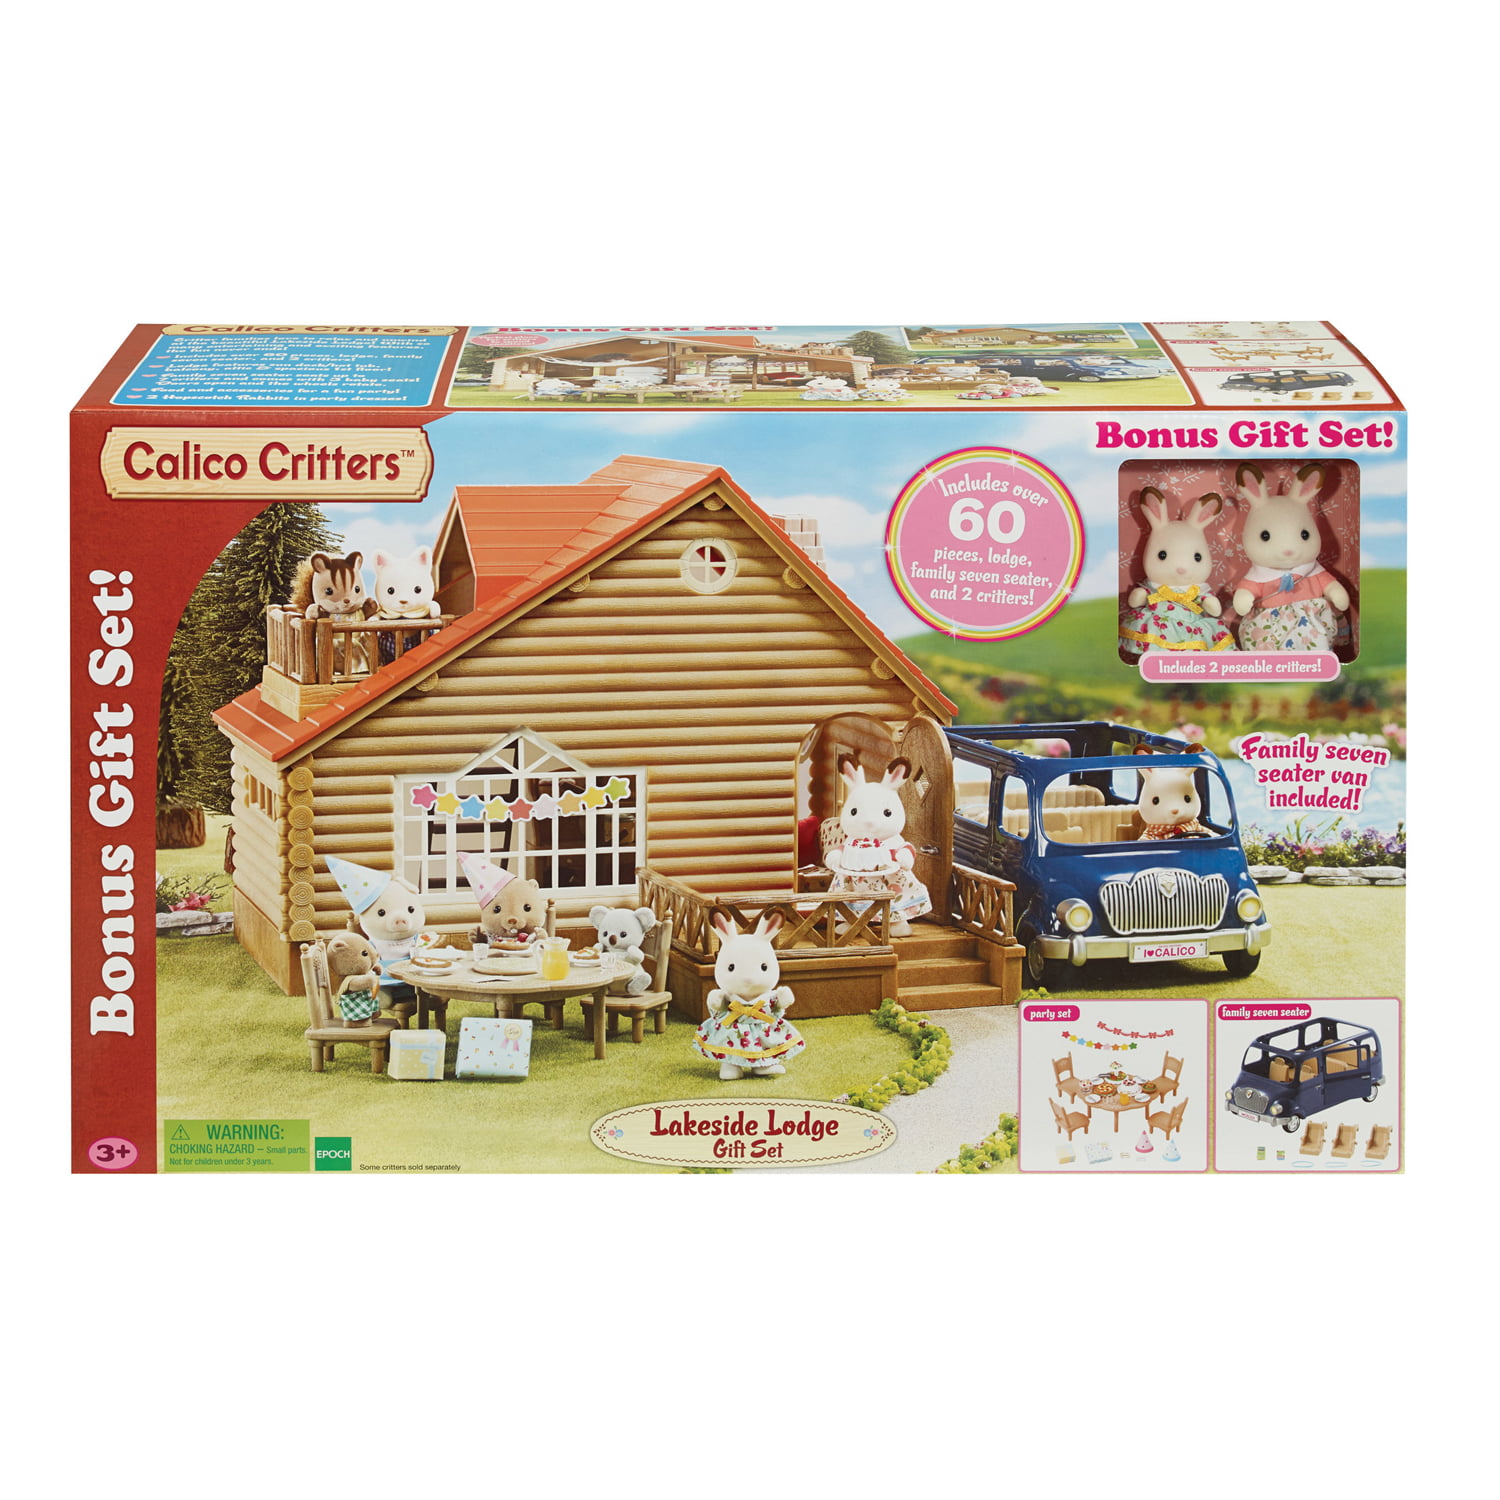 Calico Critters Gift Set Online, 58% OFF | www.simbolics.cat